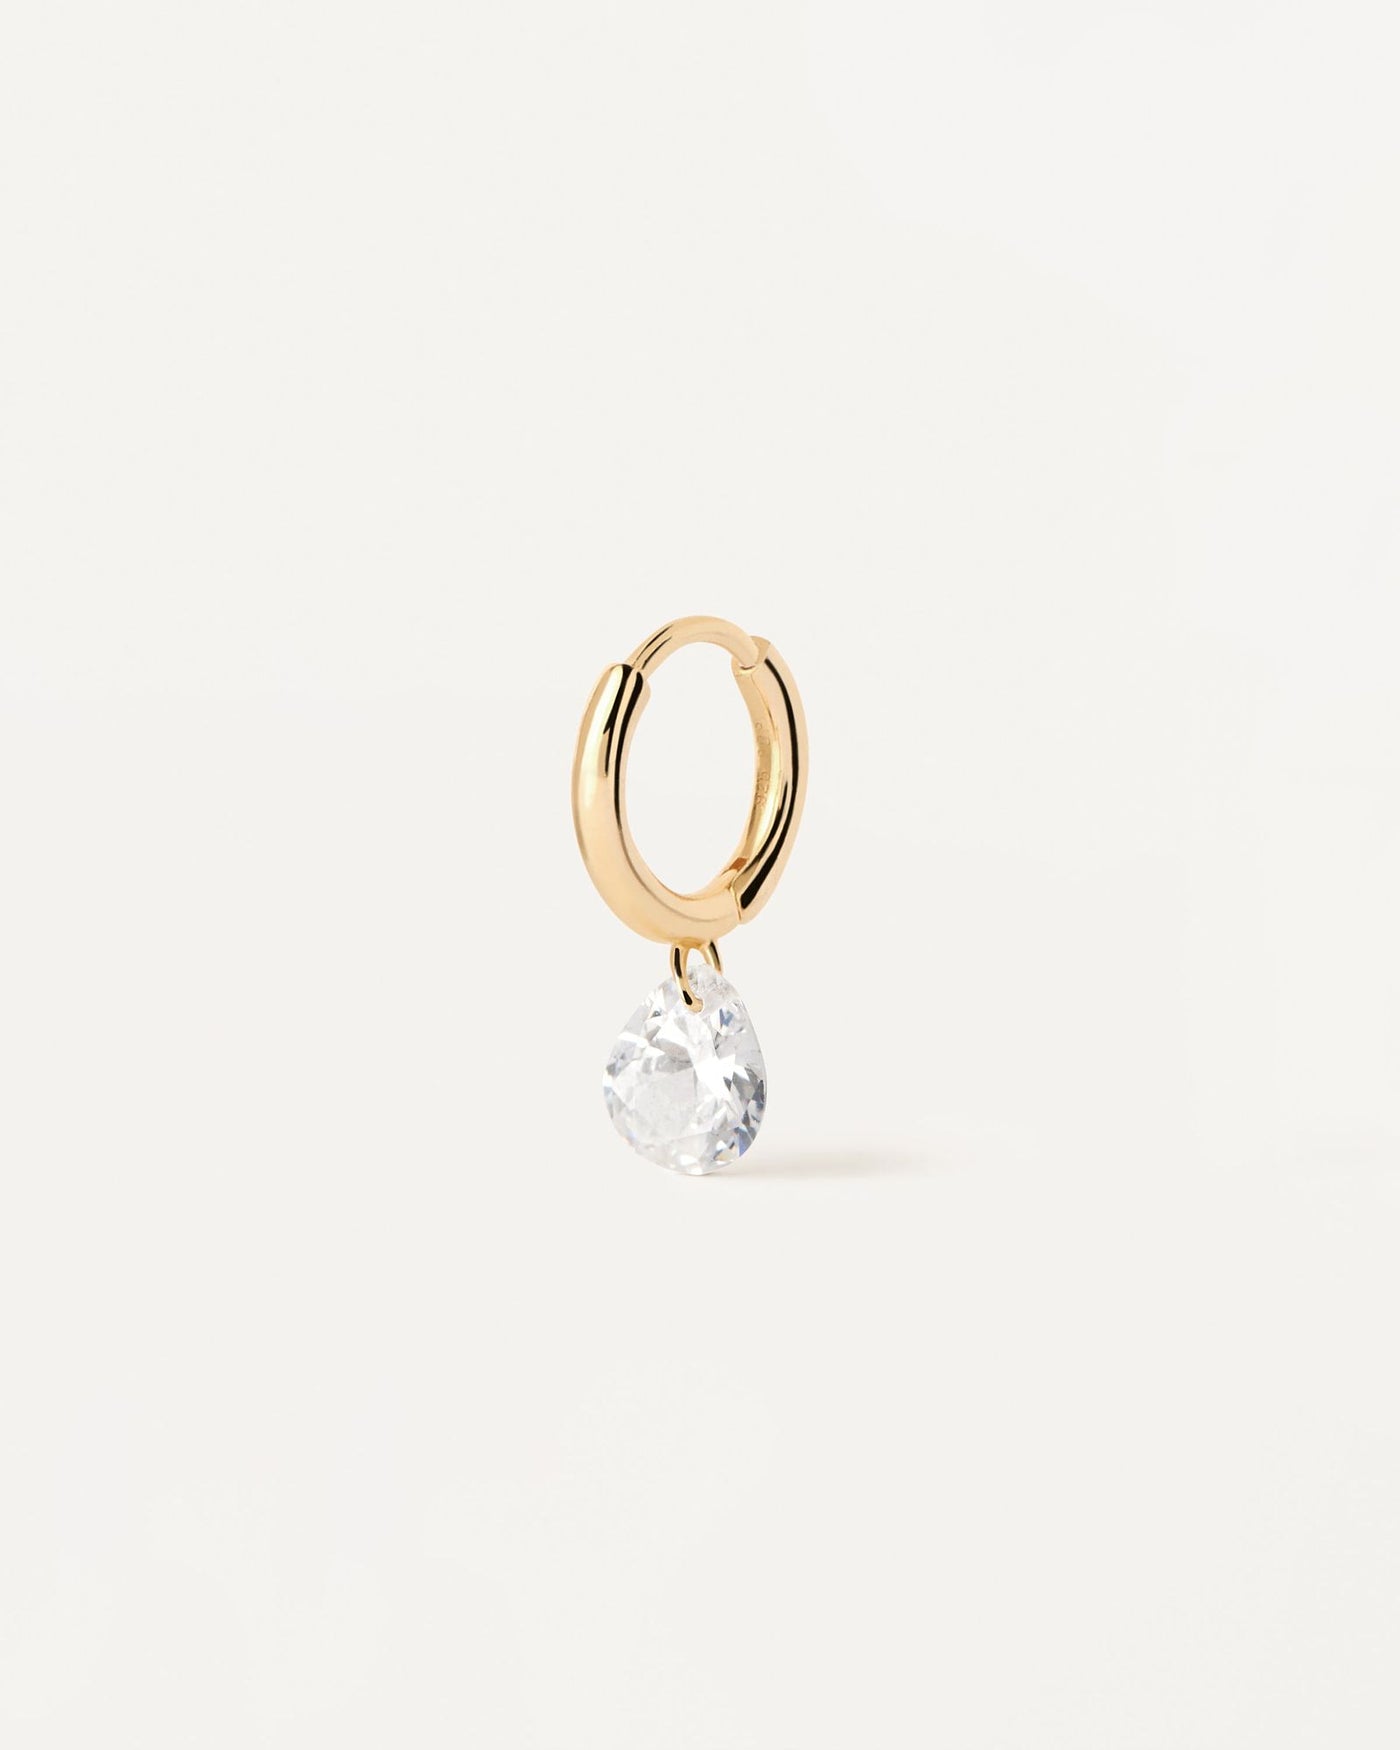 2024 Selection | Aqua Single Hoop Earring. Gold-plated silver ear piercing with white zirconia drop pendant. Get the latest arrival from PDPAOLA. Place your order safely and get this Best Seller. Free Shipping.